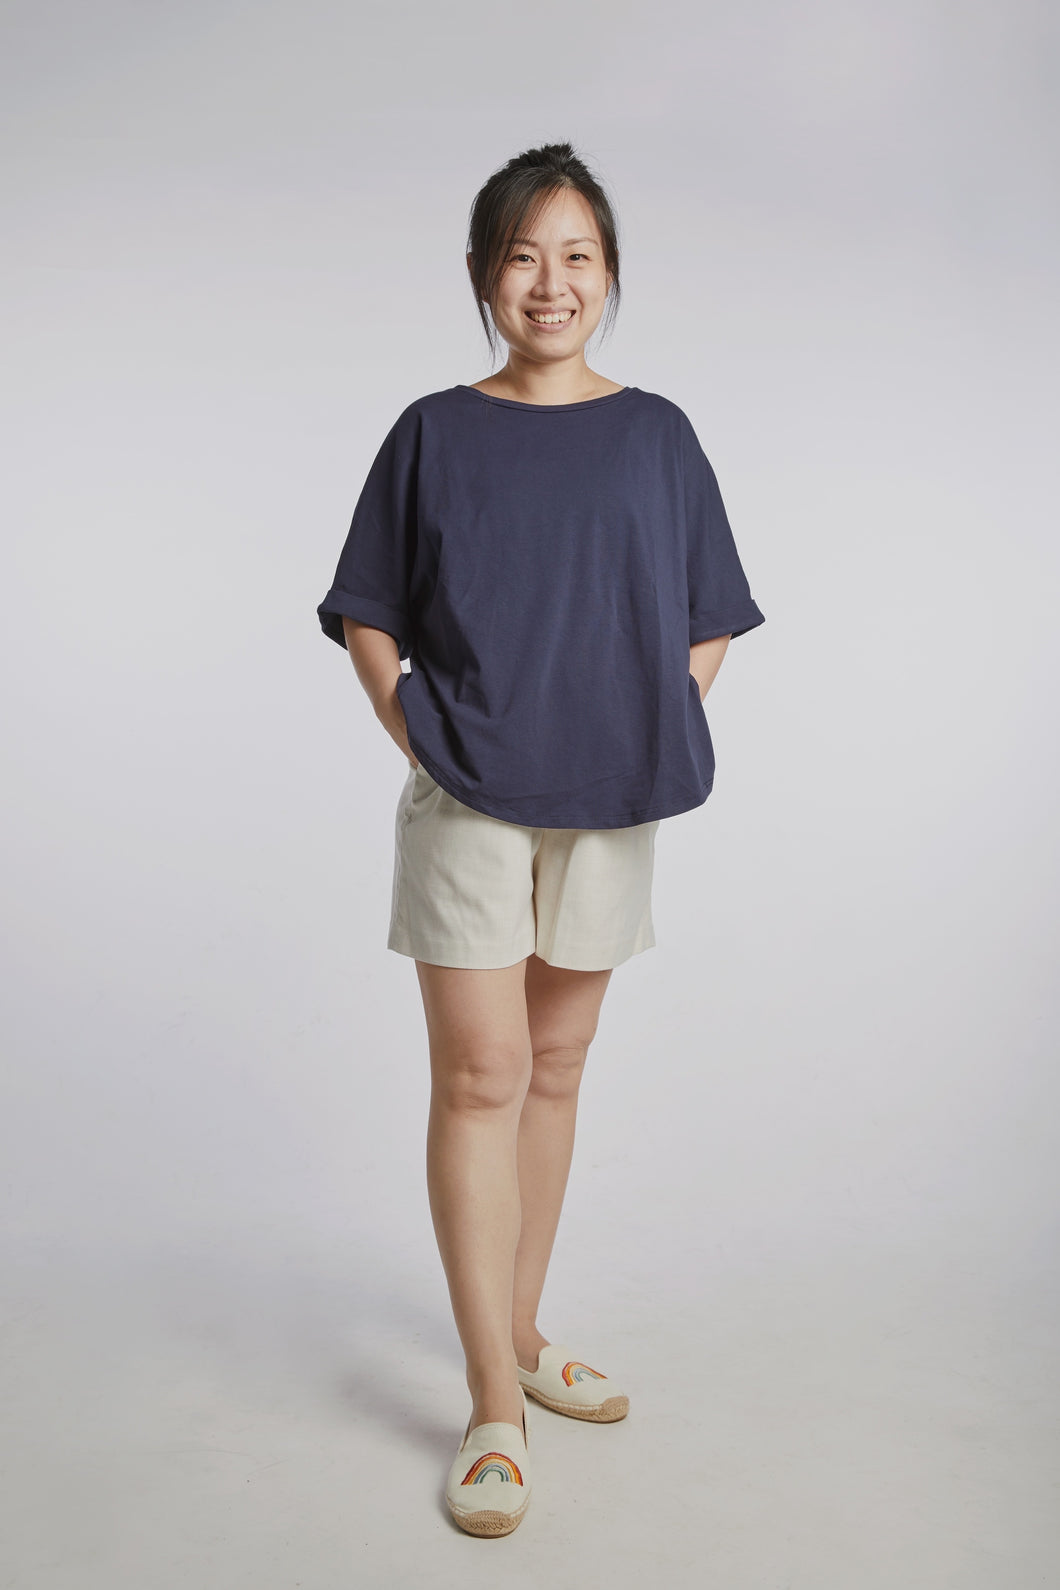 A Mighty Top (Midnight Blue) - Size S